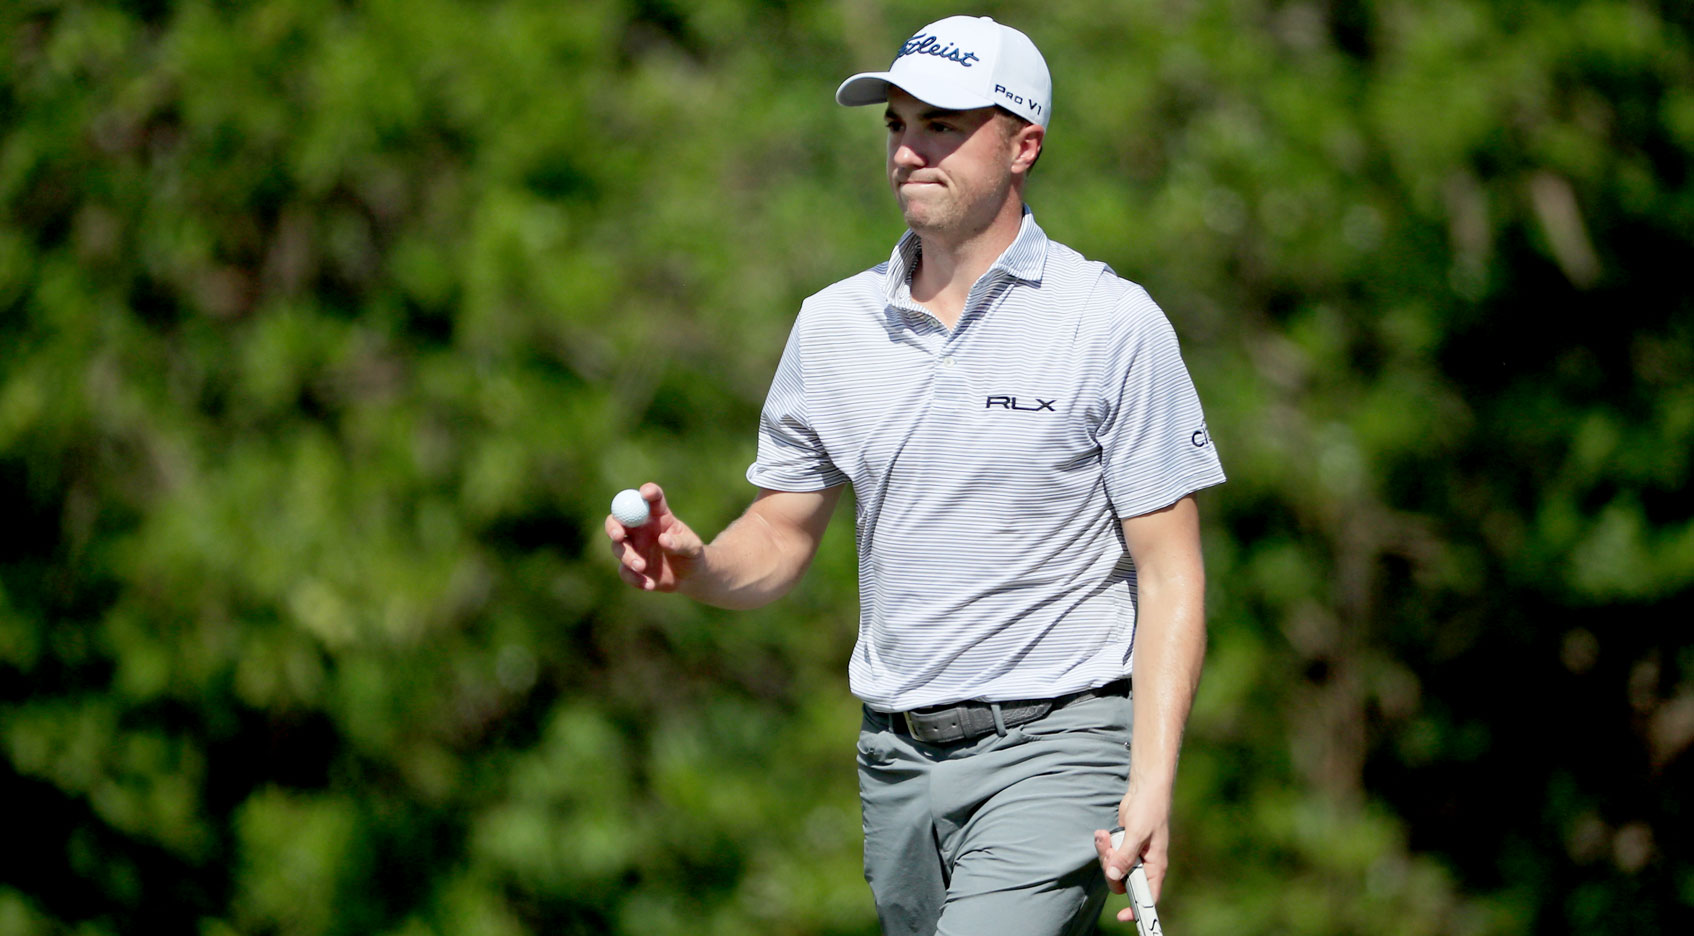 Justin Thomas cards 62, moves into contention at Mayakoba Golf Classic presented by UNIFIN